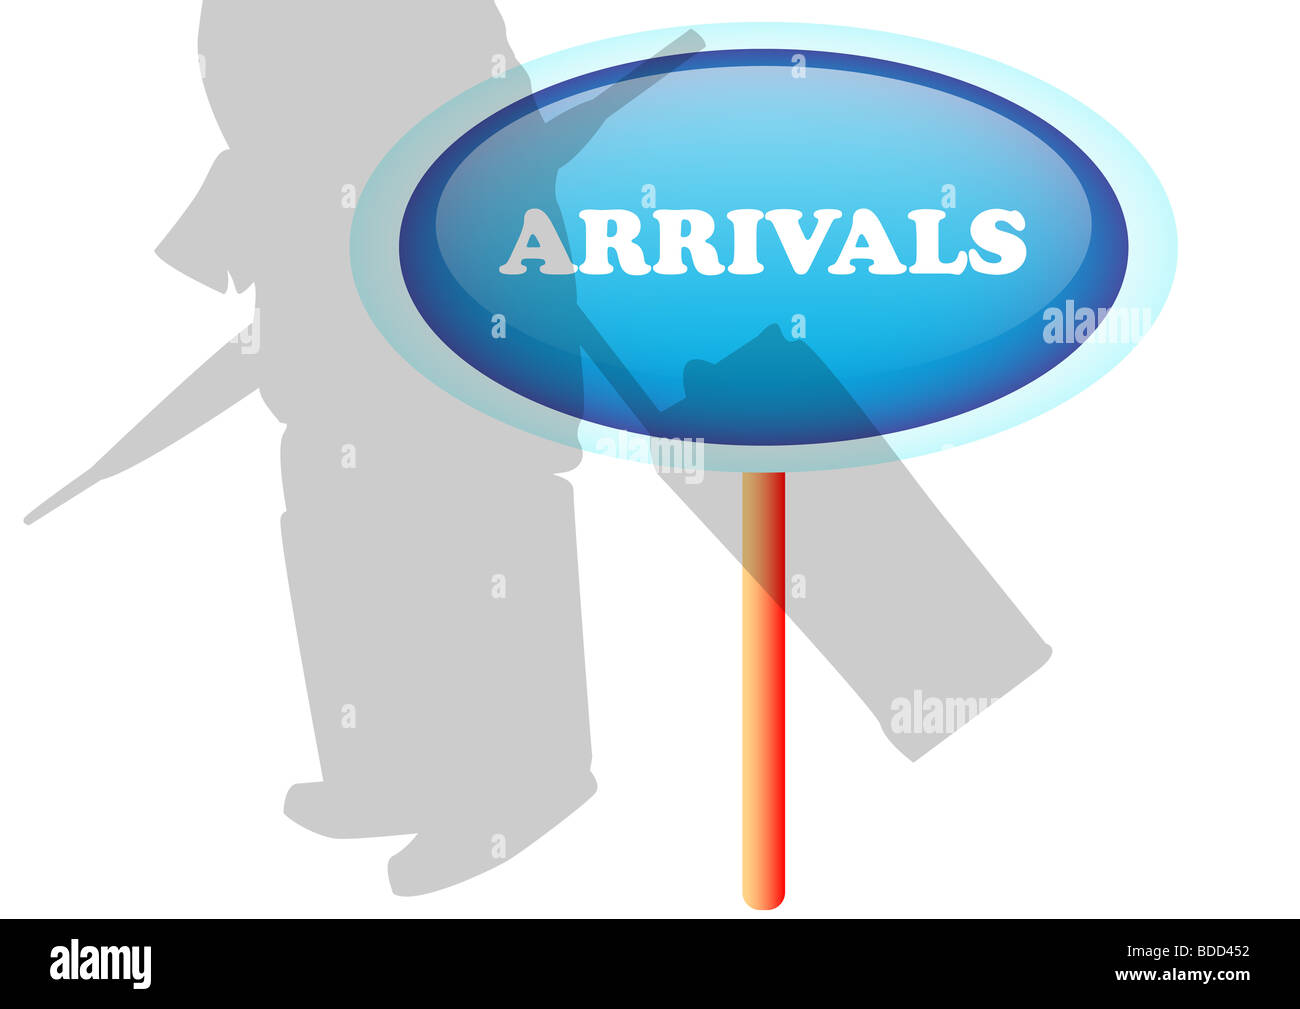 Arrivals sign Stock Photo